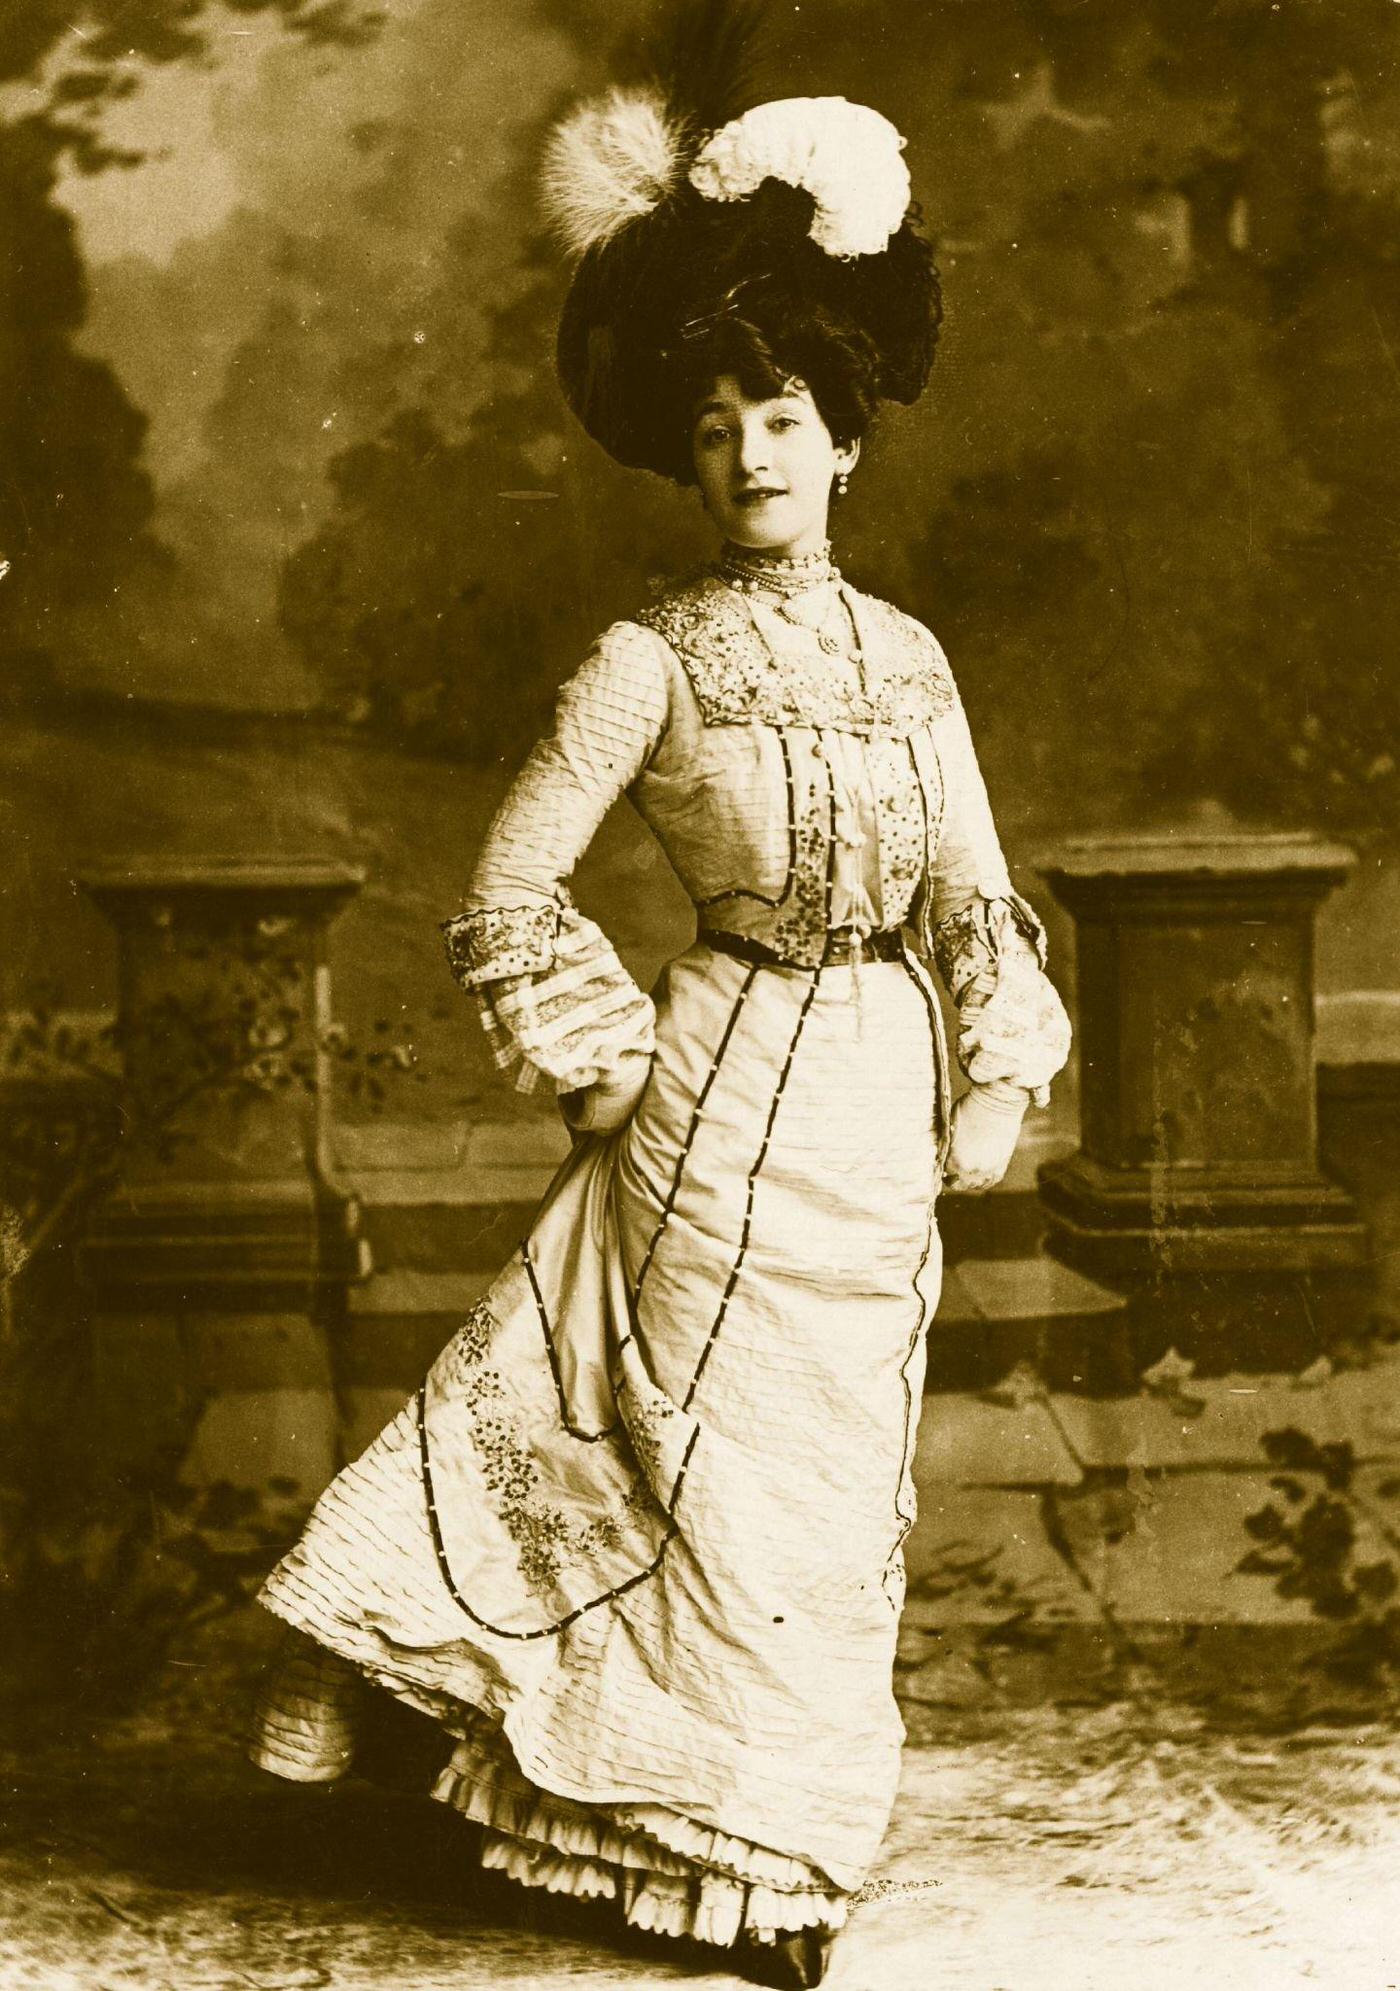 An Edwardian lady wears a high-necked blouse and hat with lace and flower trimmings